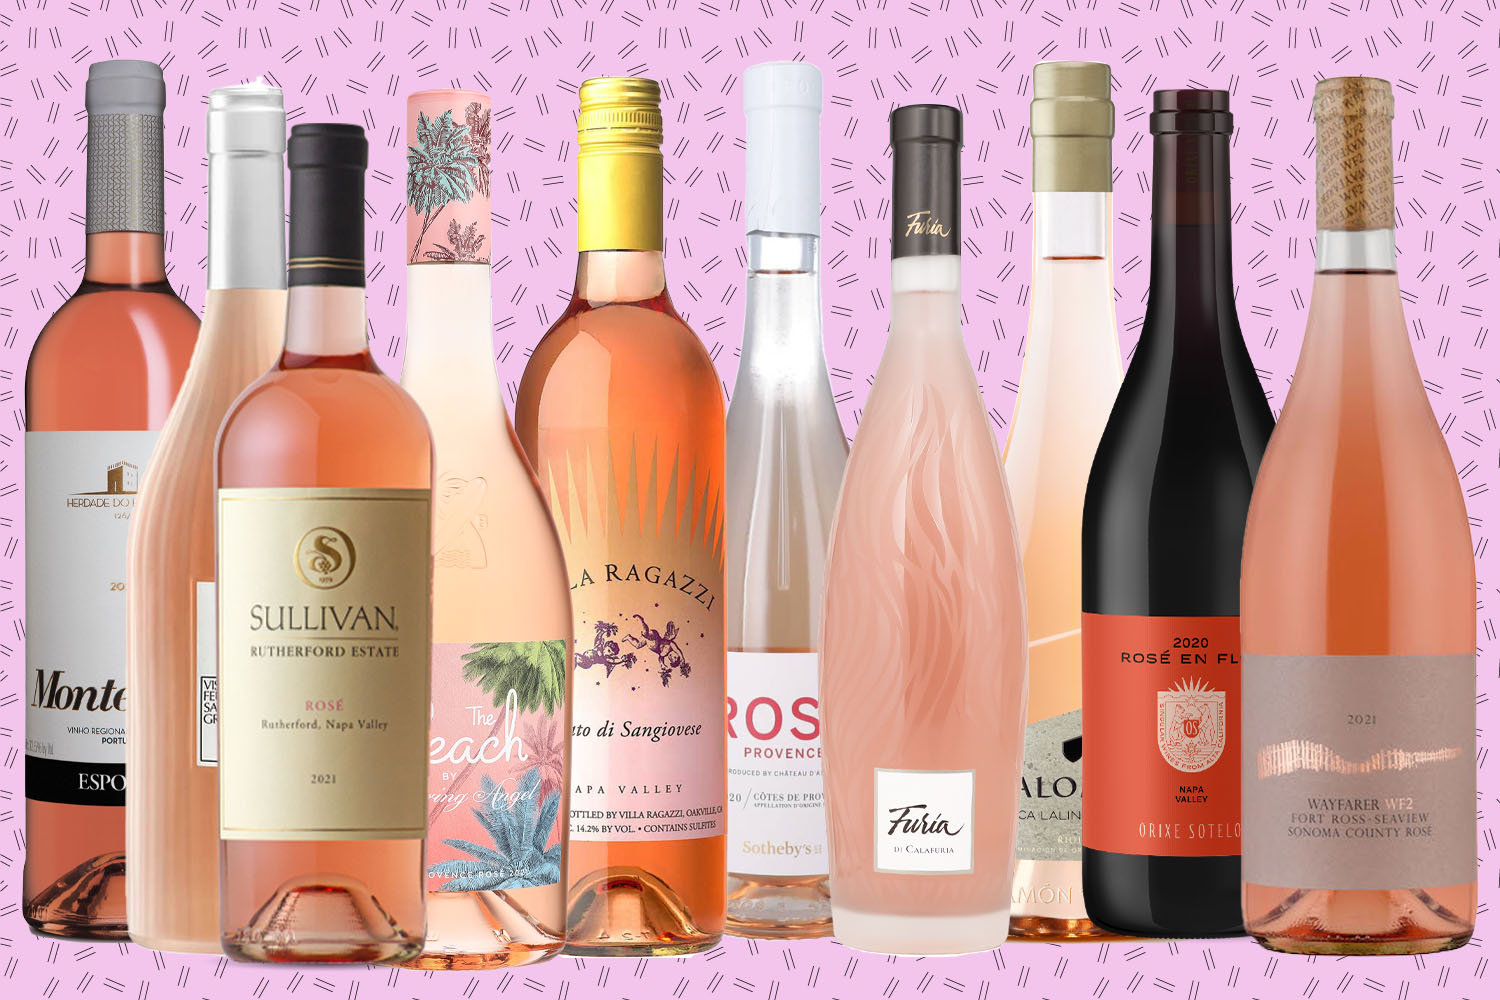 Pink Wine Season Is Upon Us: The 10 Best New Rose Bottles, Rated - Bloomberg